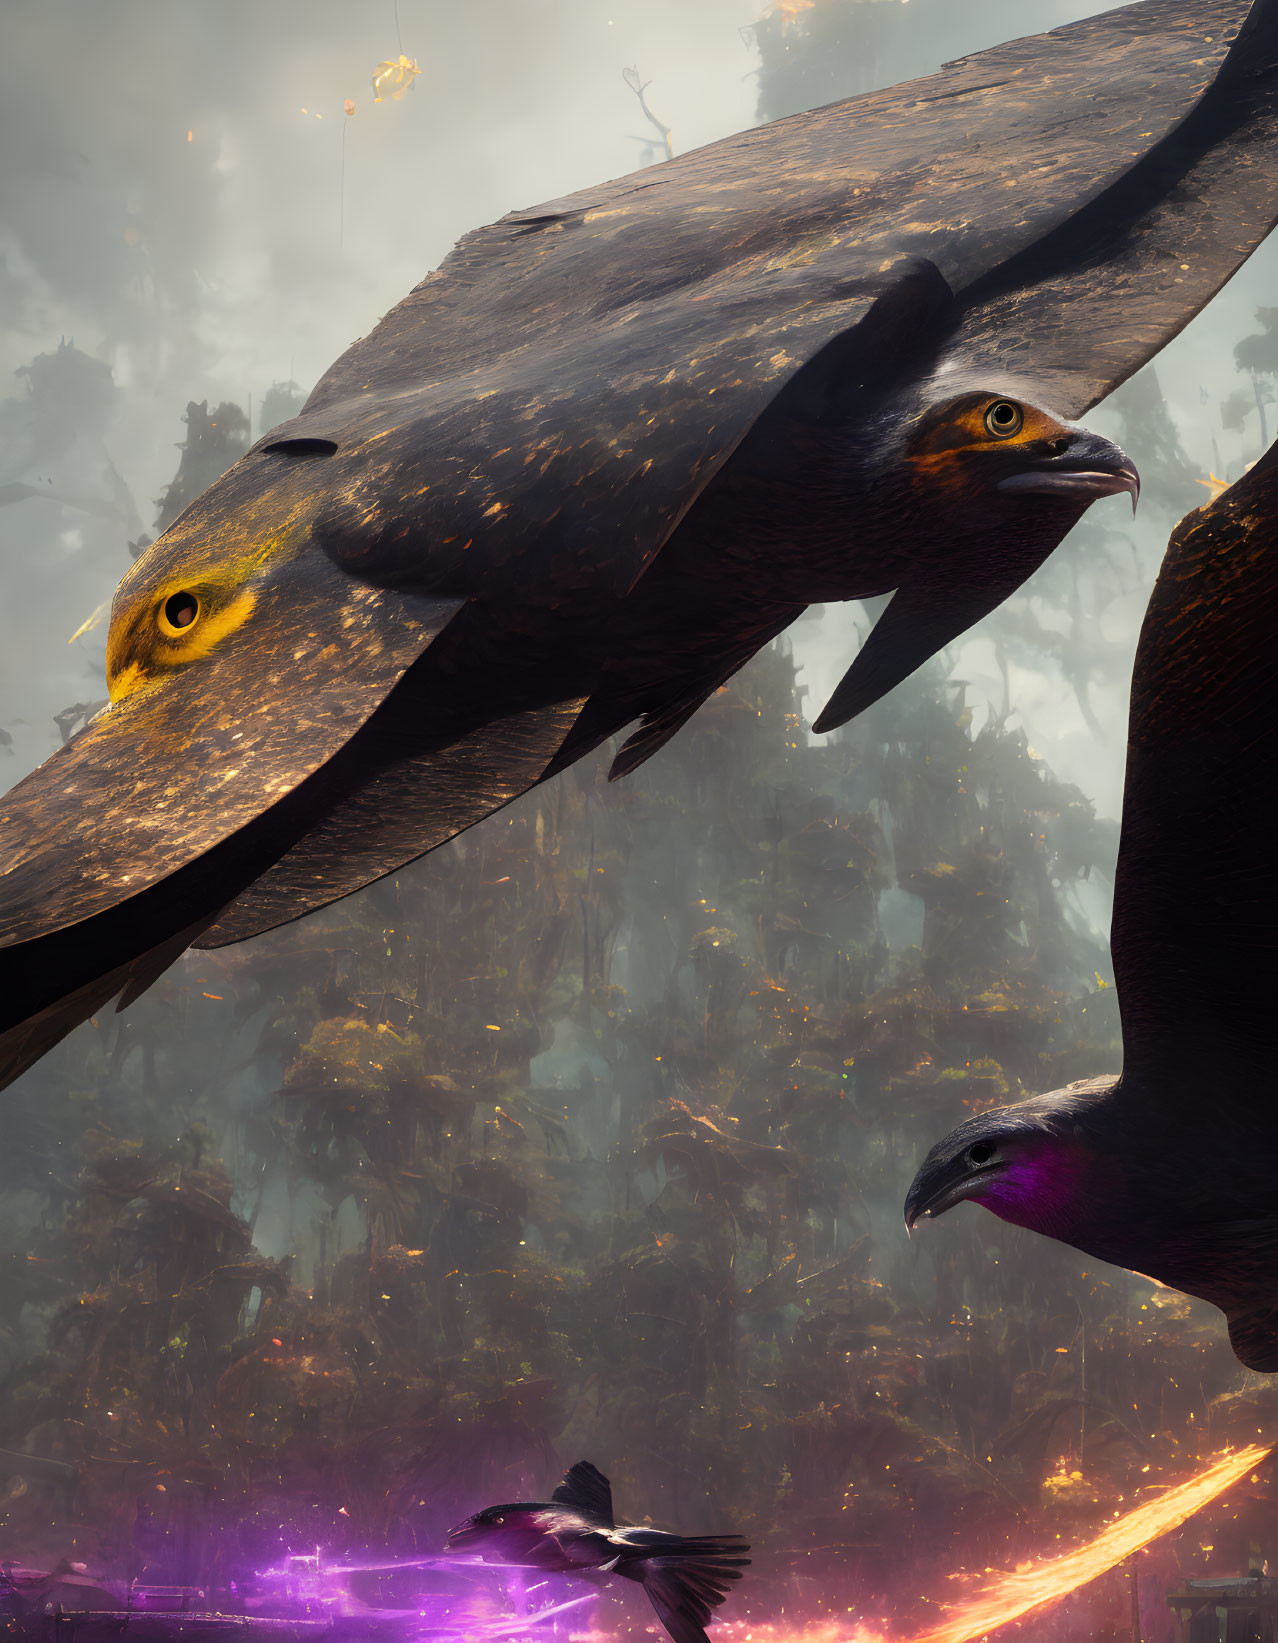 Gigantic Birds Flying Above Glowing Forest with Smaller Birds